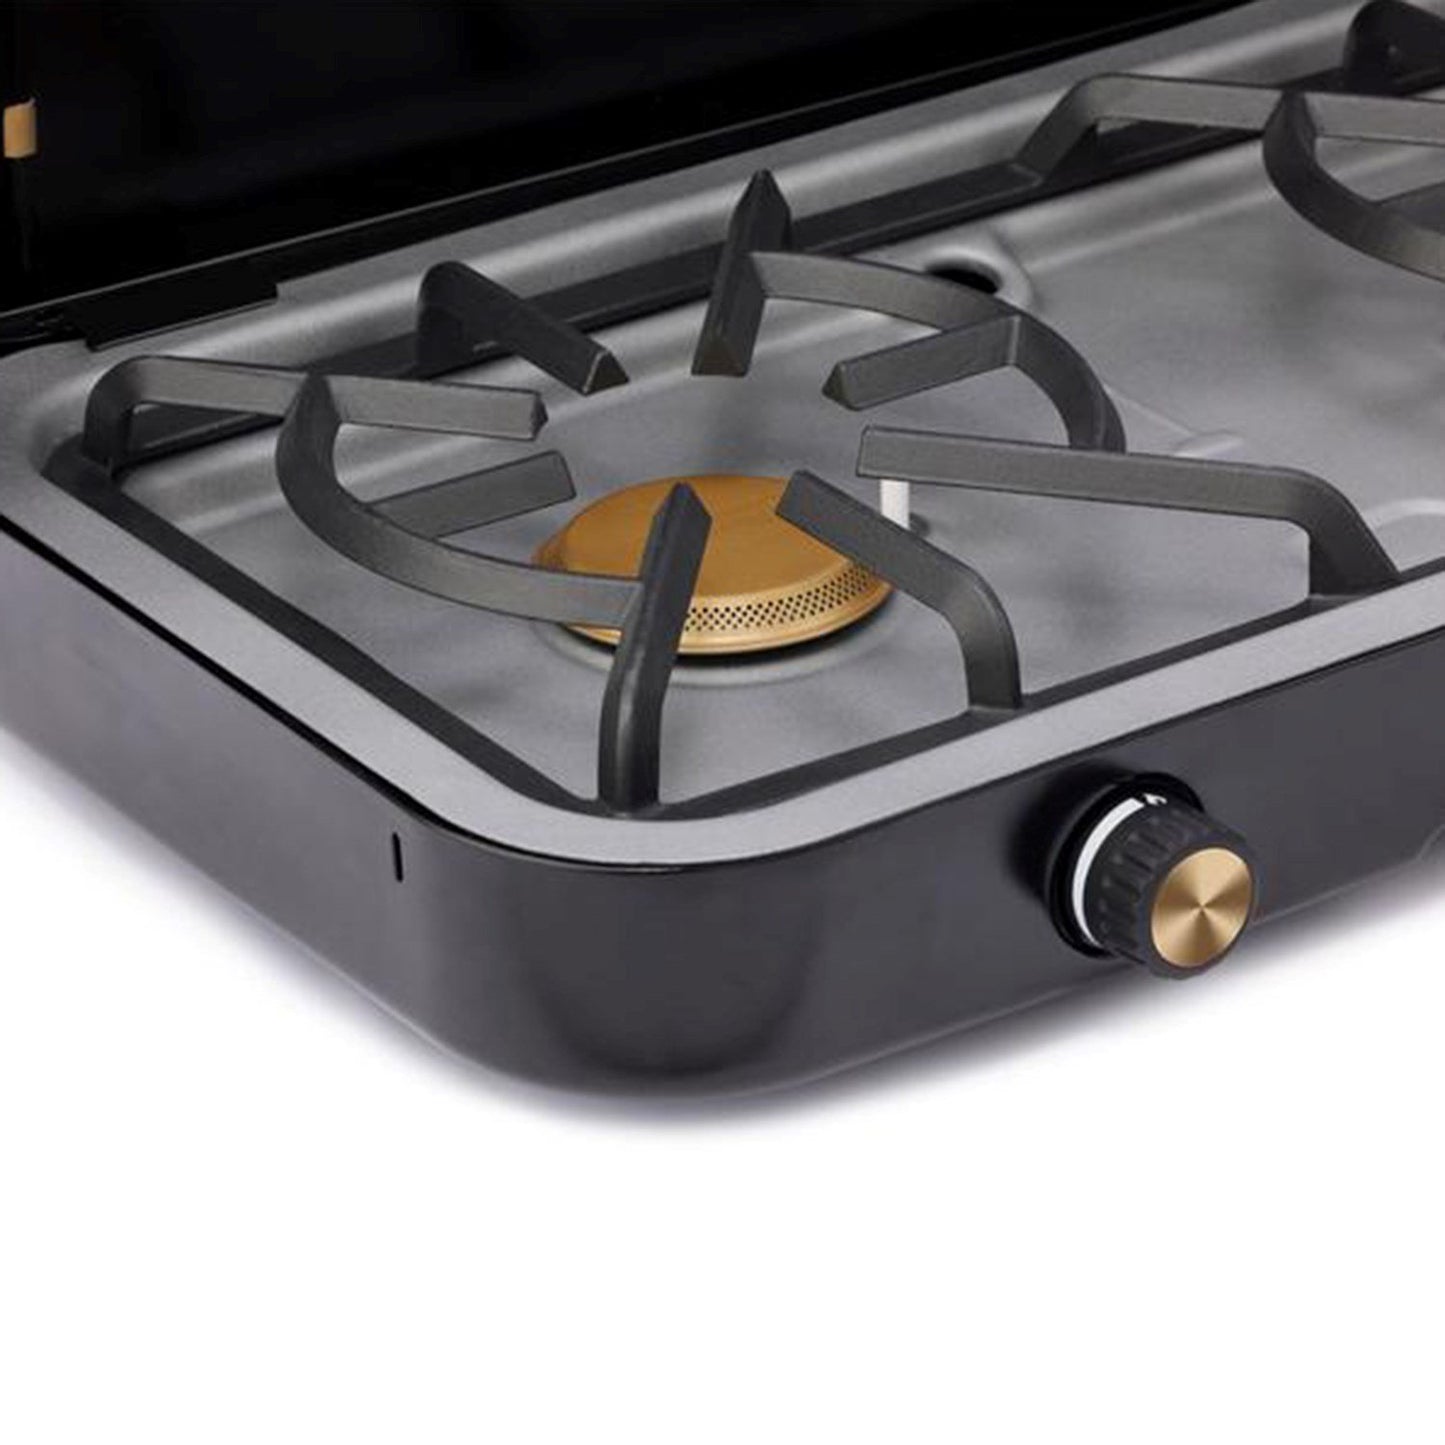 1900 Collection 3-in-1 Propane Stove